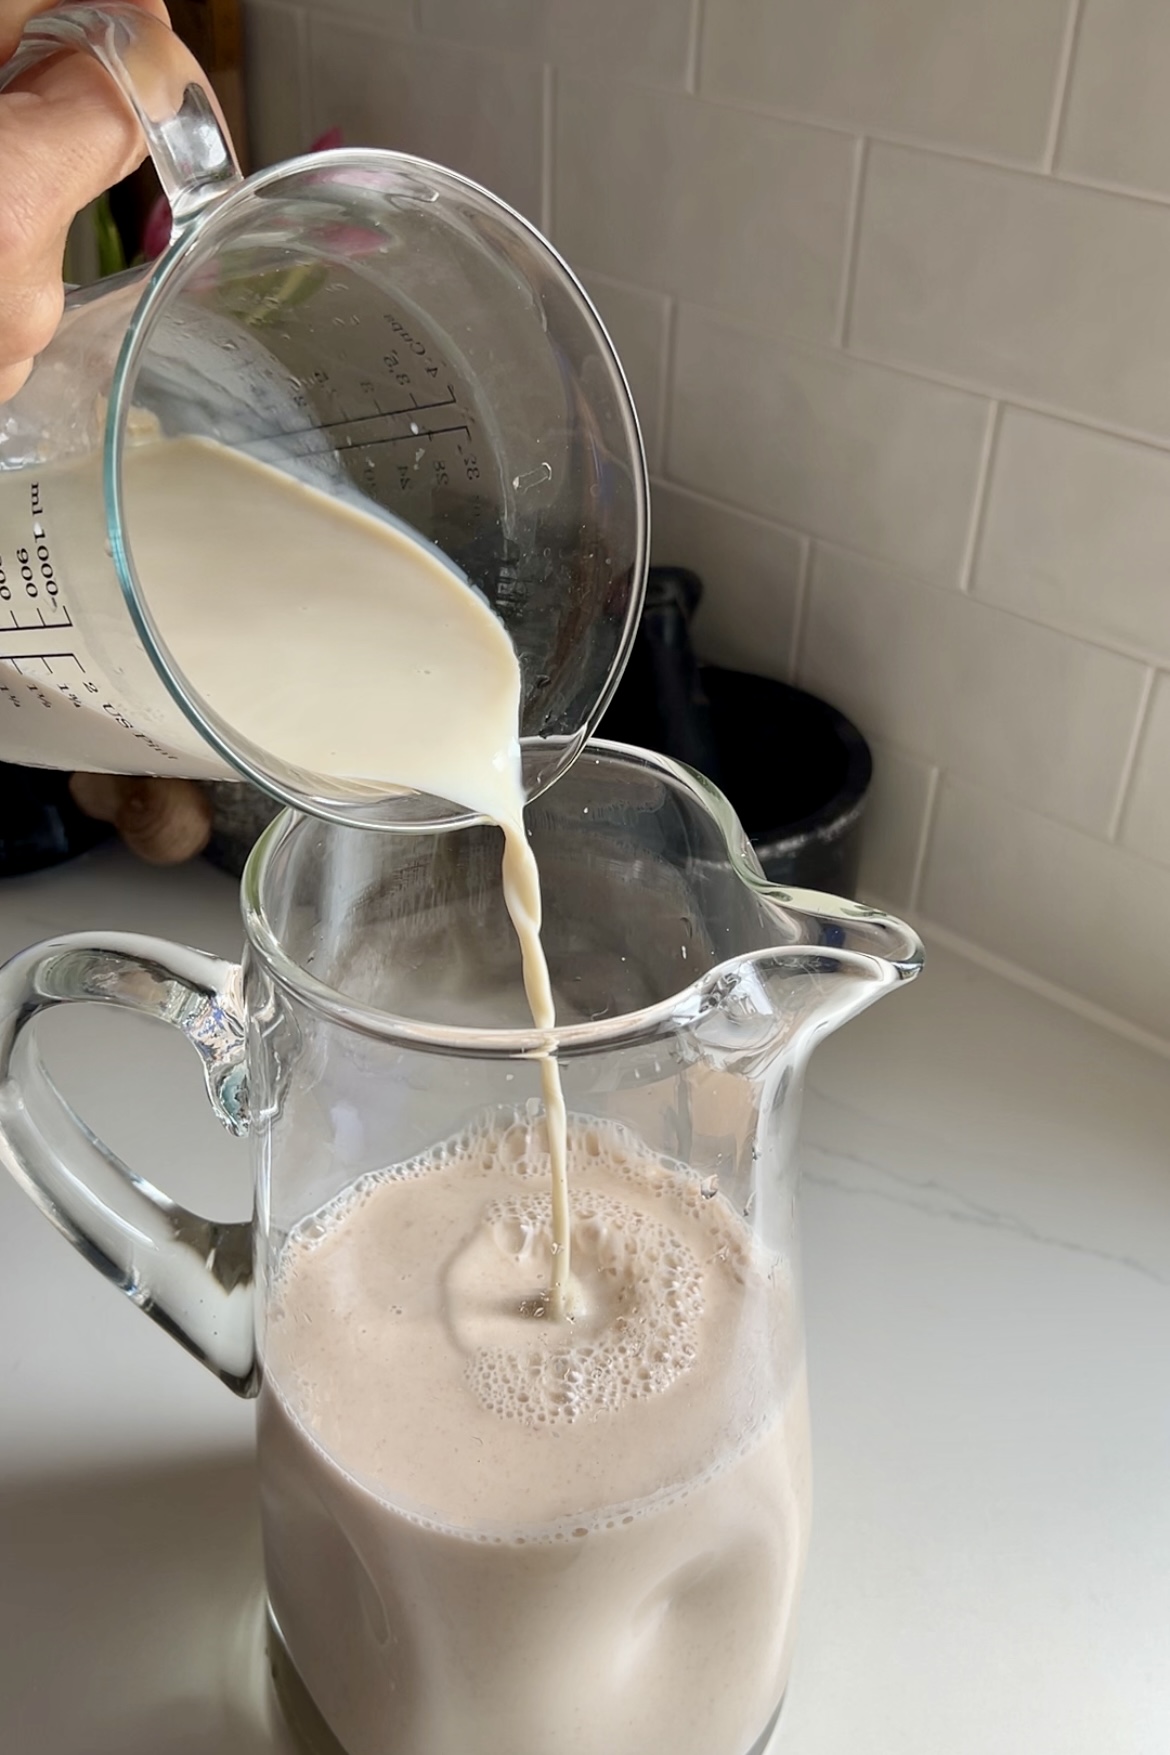 A person pours a stream of creamy milk from a measuring cup into a glass pitcher filled with frothy, light brown vegan horchata, set against a kitchen backsplash.